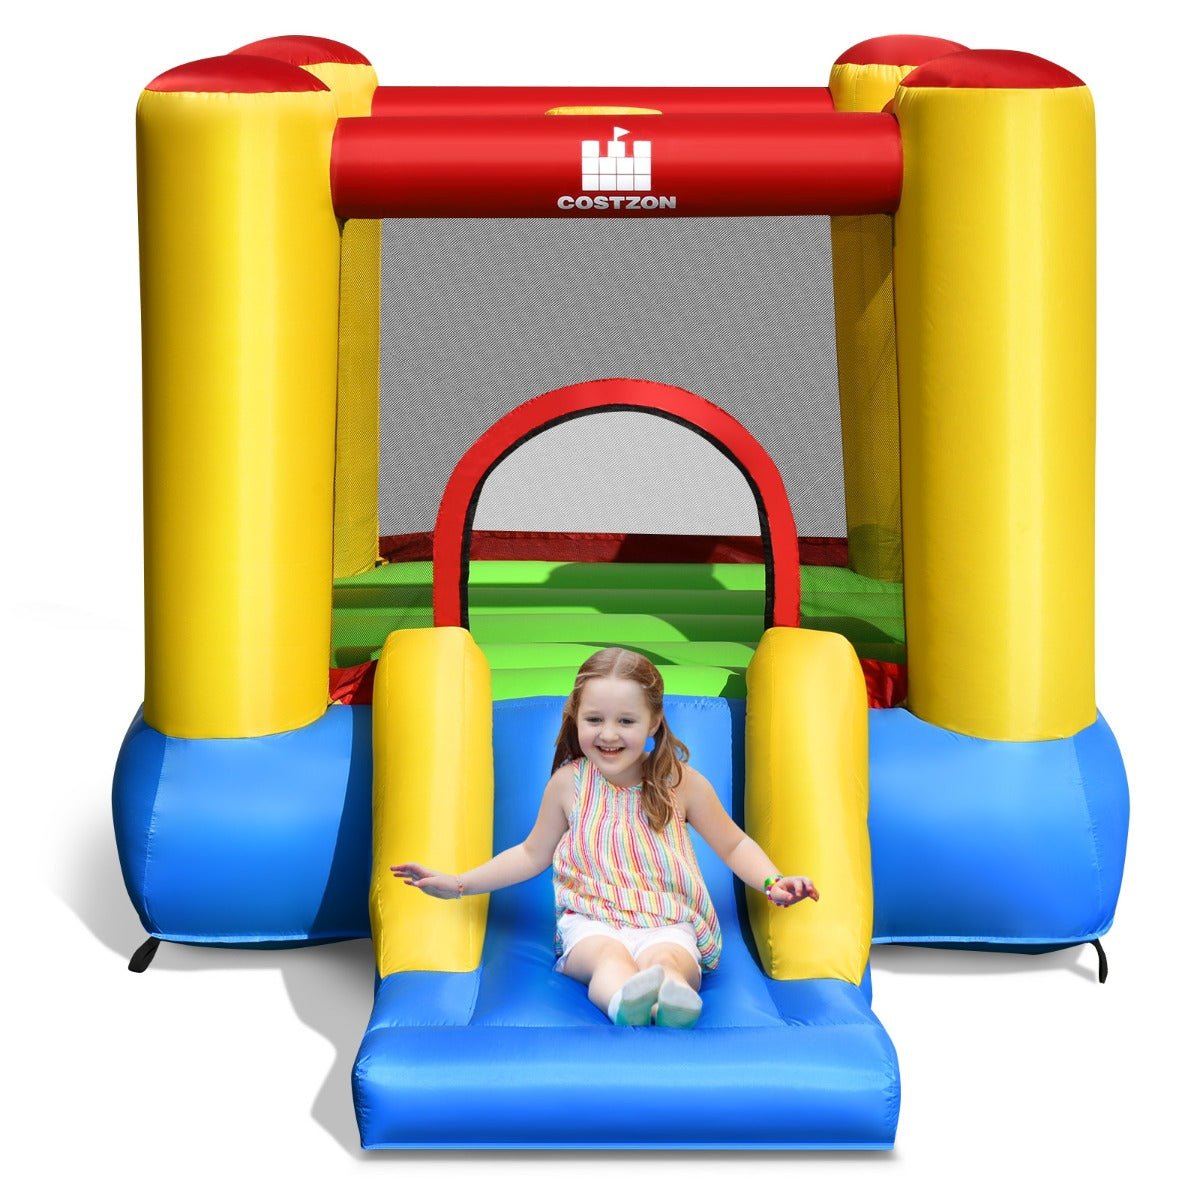 Inflatable Play Structure for Kids - Slide, Hoop, and Joyful Bouncing